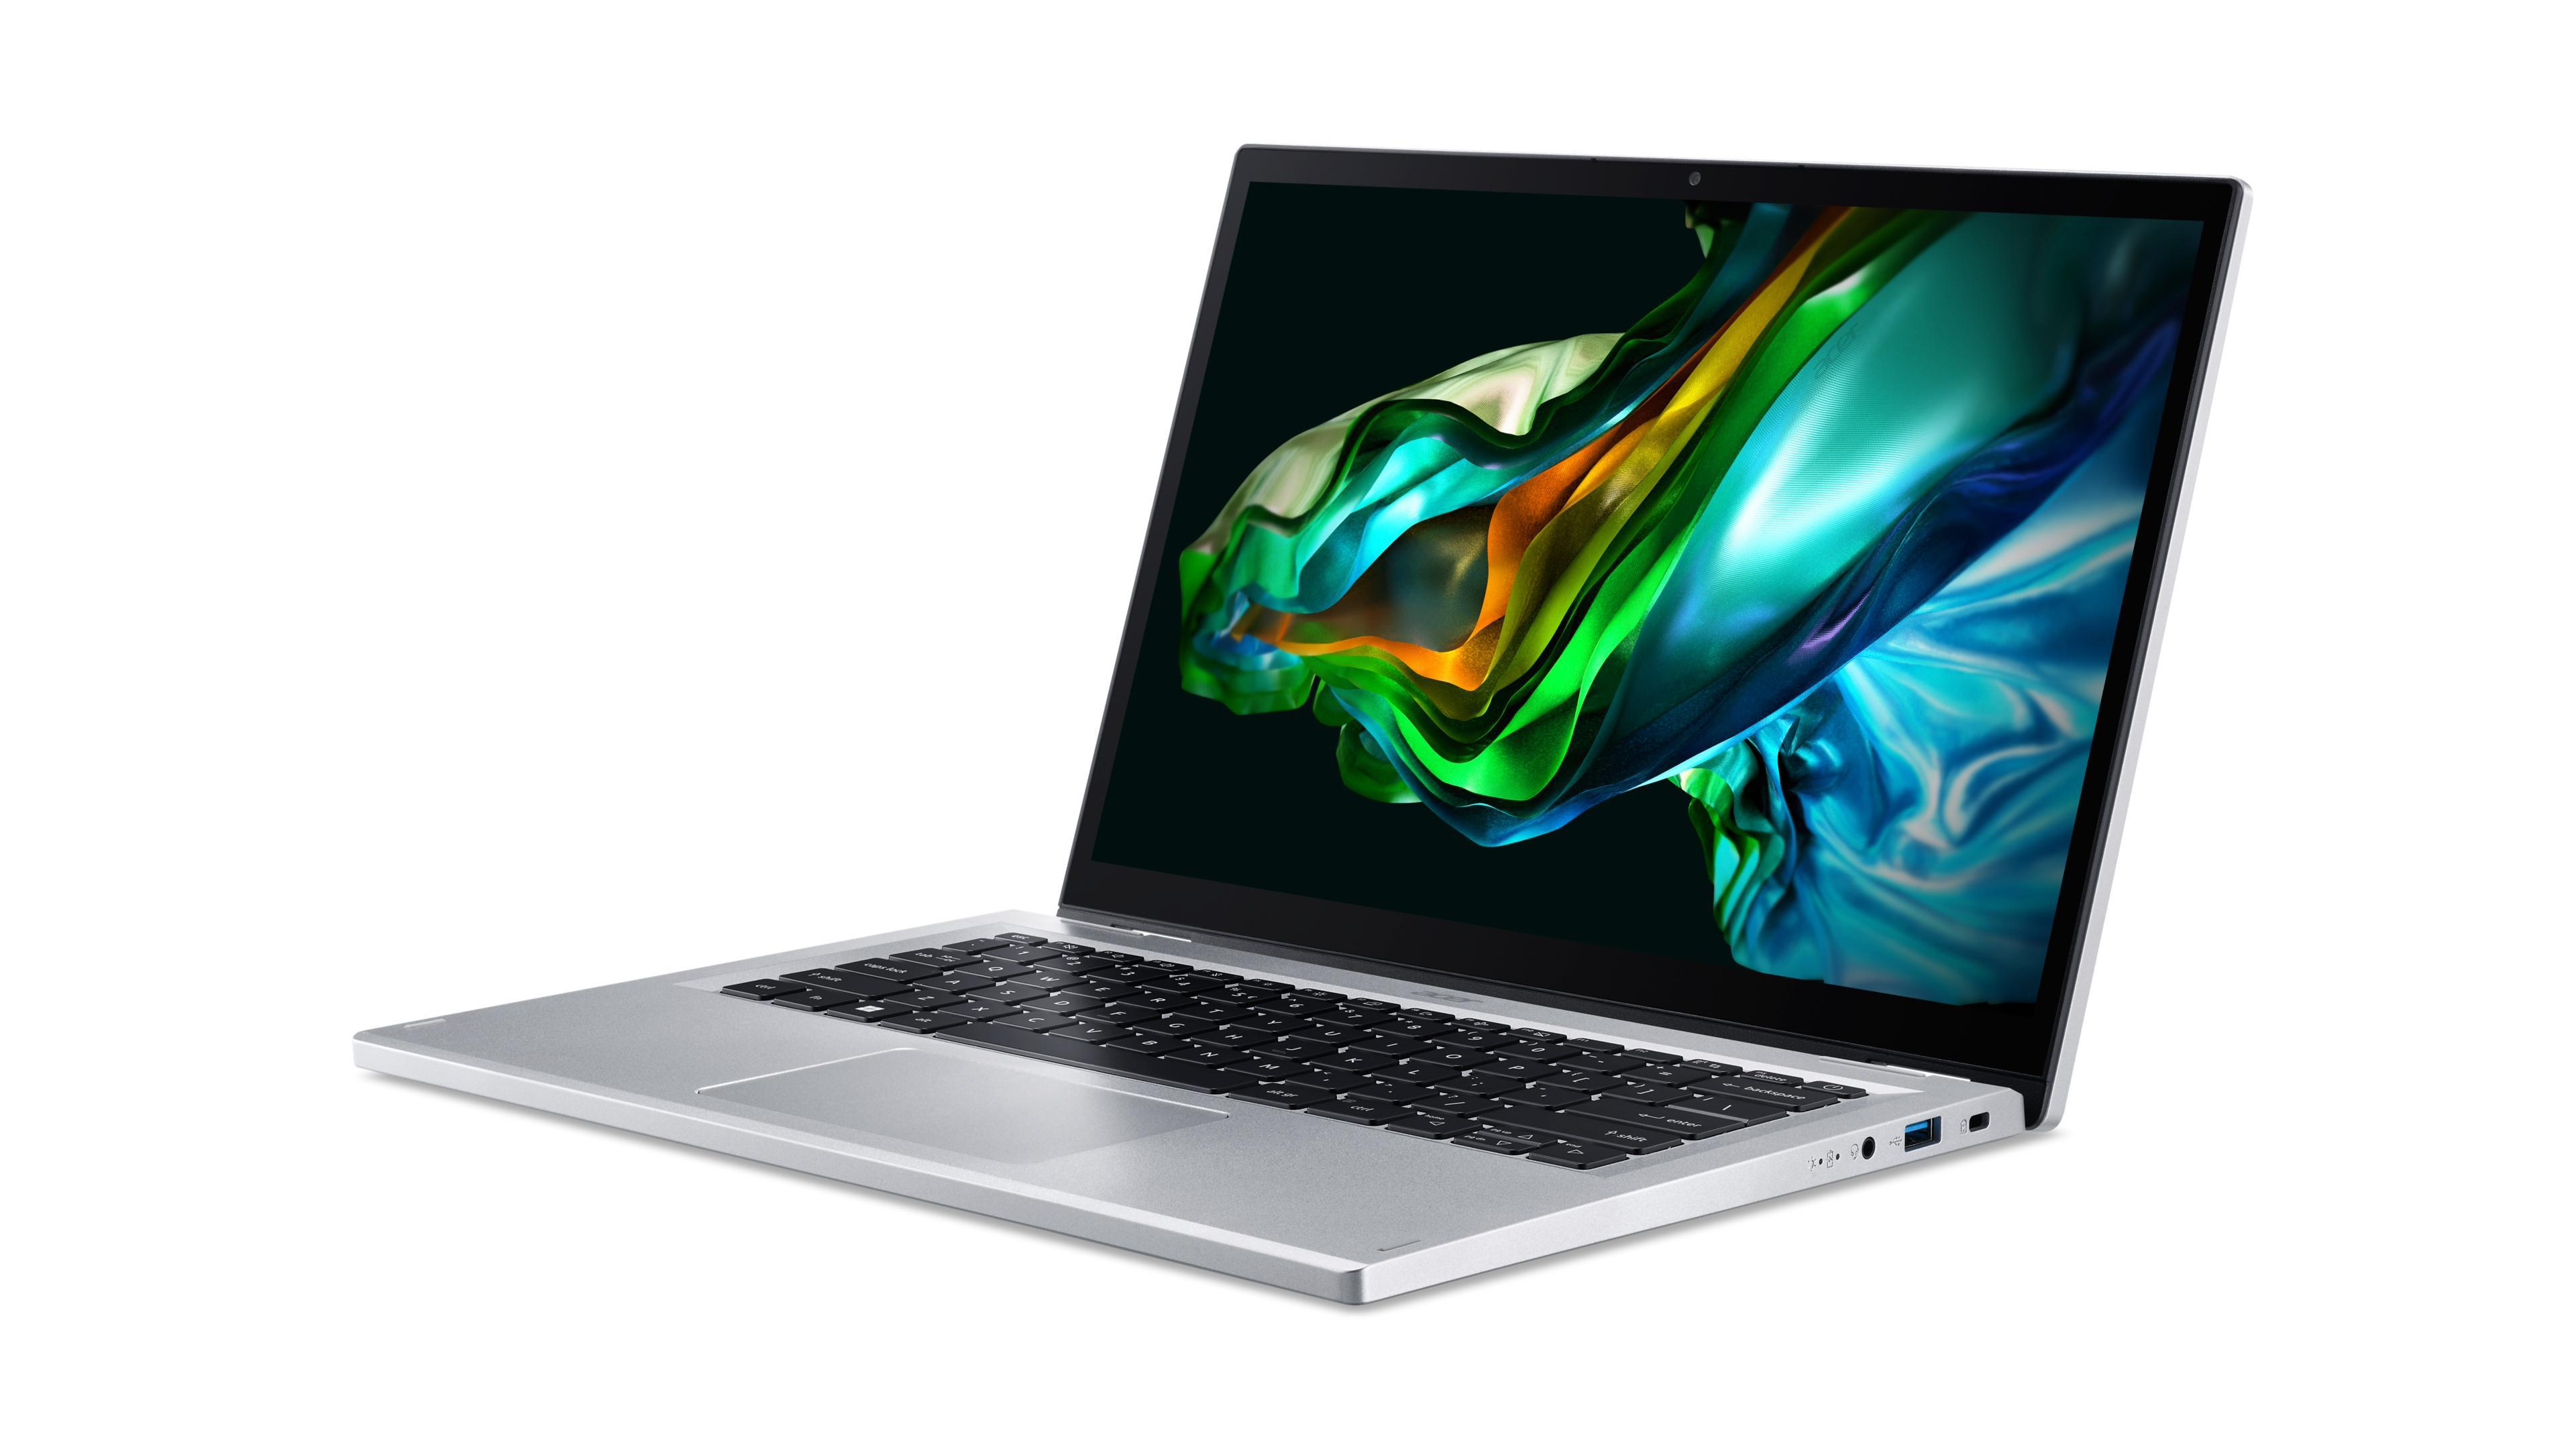 SSD, Windows Silver Convertibe Zoll 3 Aspire 11 (64 ACER Home Intel®, Prozessor, (A3SP14-31PT-310V), 8 RAM, i3 Graphics, 14 Bit) GB Intel® Display Spin Notebook, Core™ 512 Pure Touchscreen, UHD GB mit